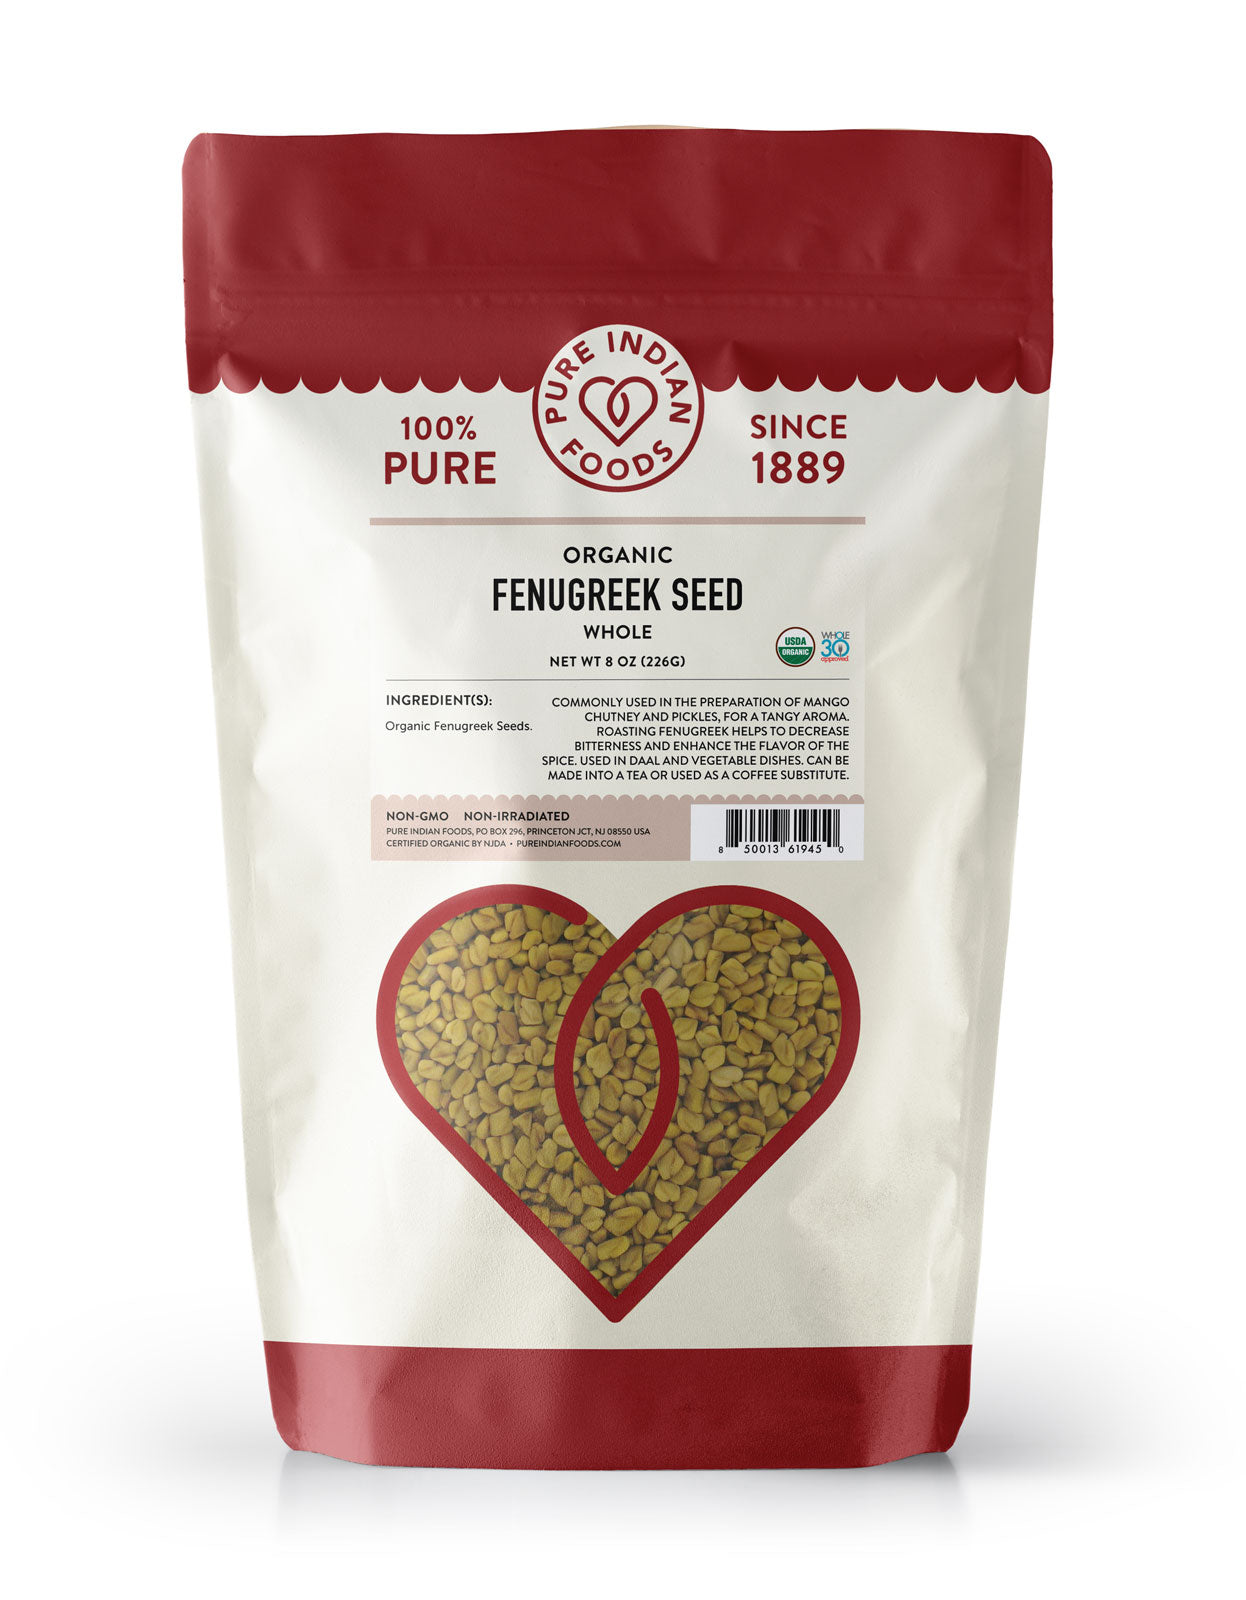 1 8oz bag of Organic Fenugreek Seed, whole, from Pure Indian Foods.